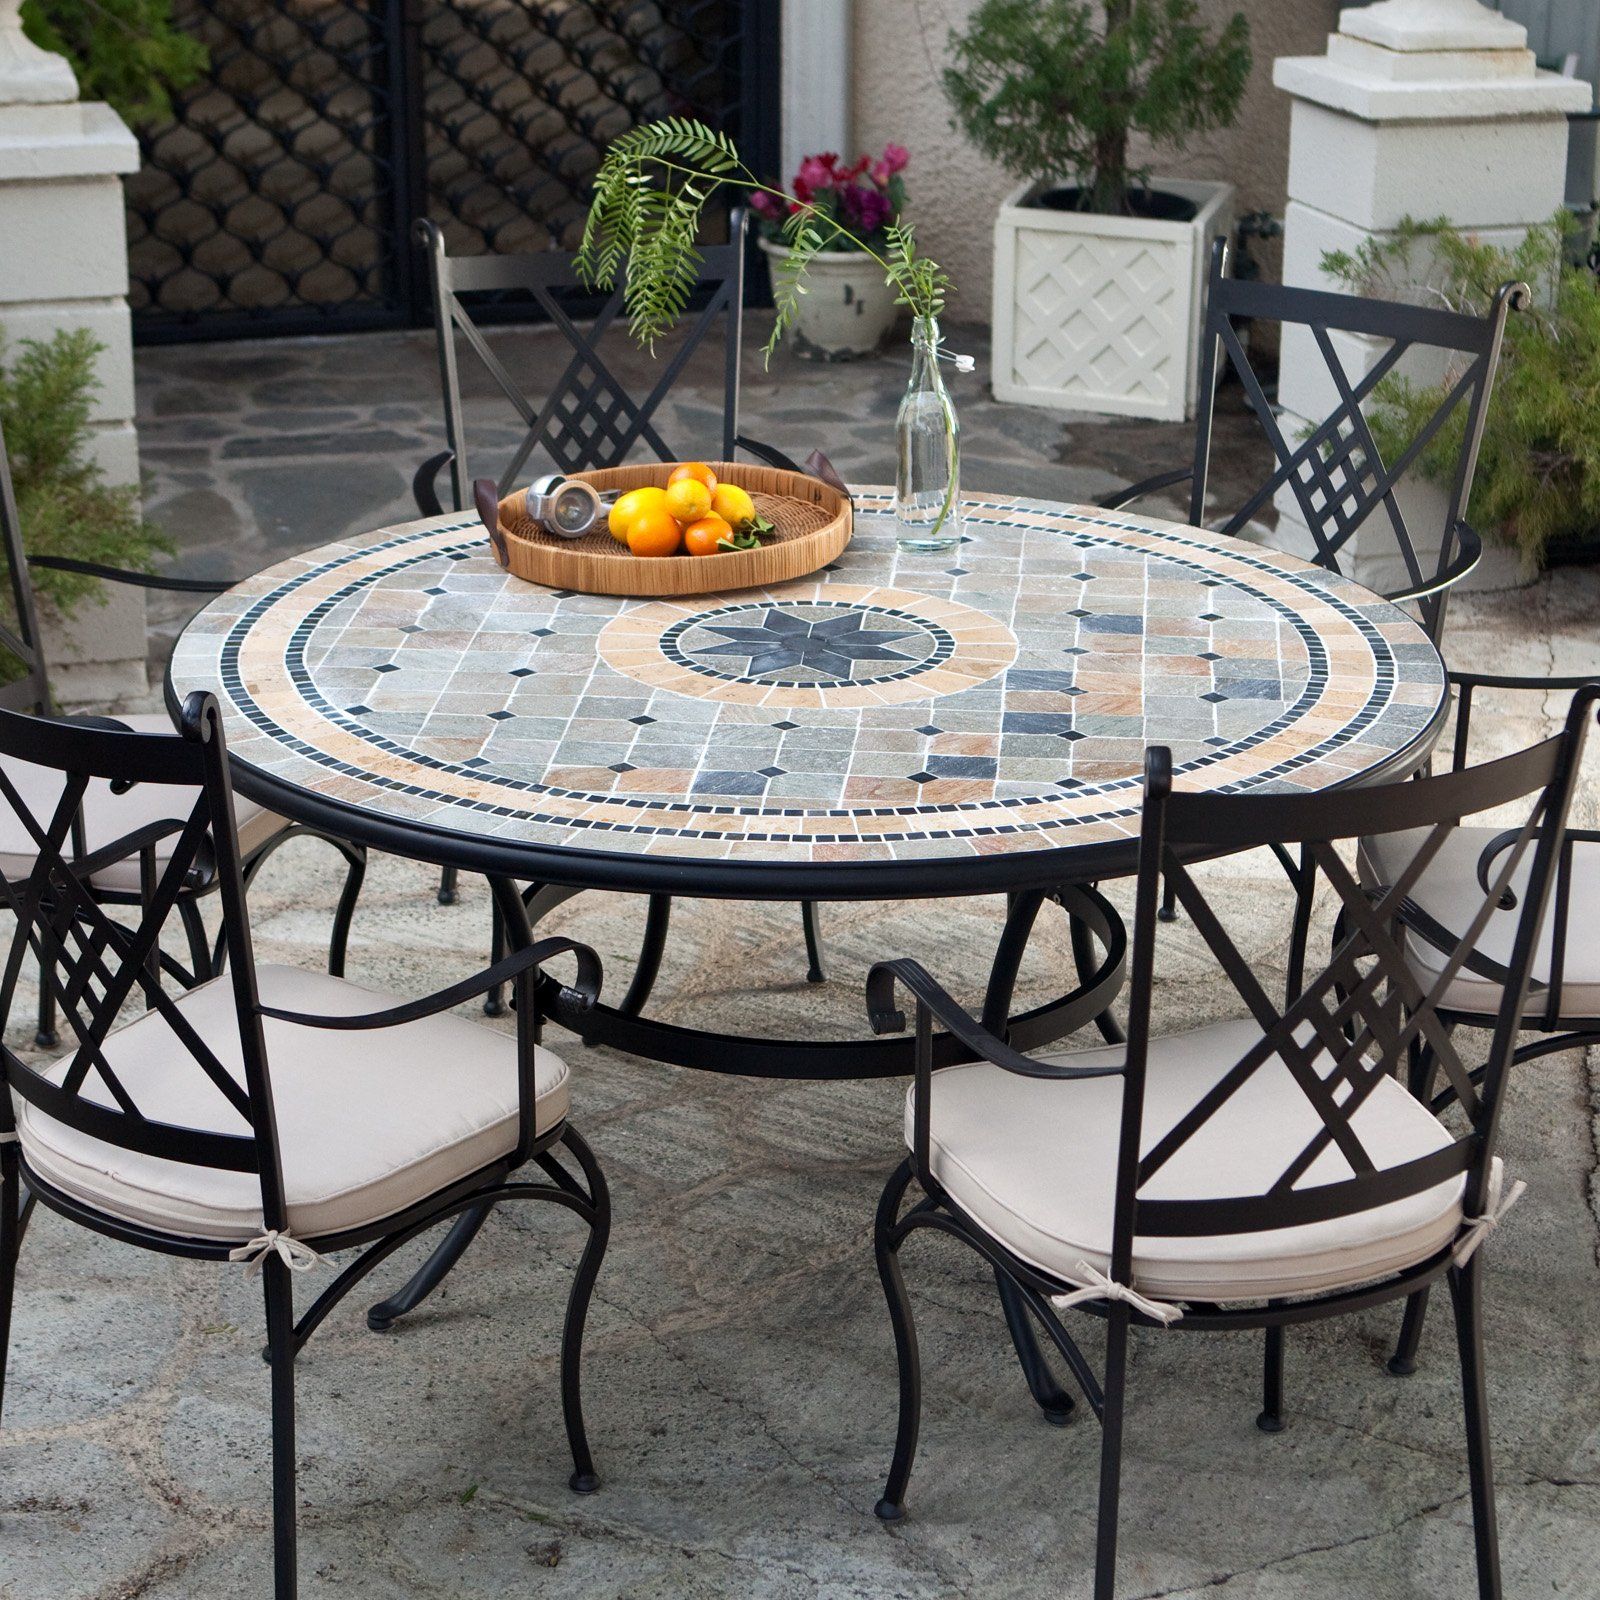 Have to have it. Palazetto Barcelona 60-in. Round Mosaic Patio Dining Set -  Seats 6 $2199.99